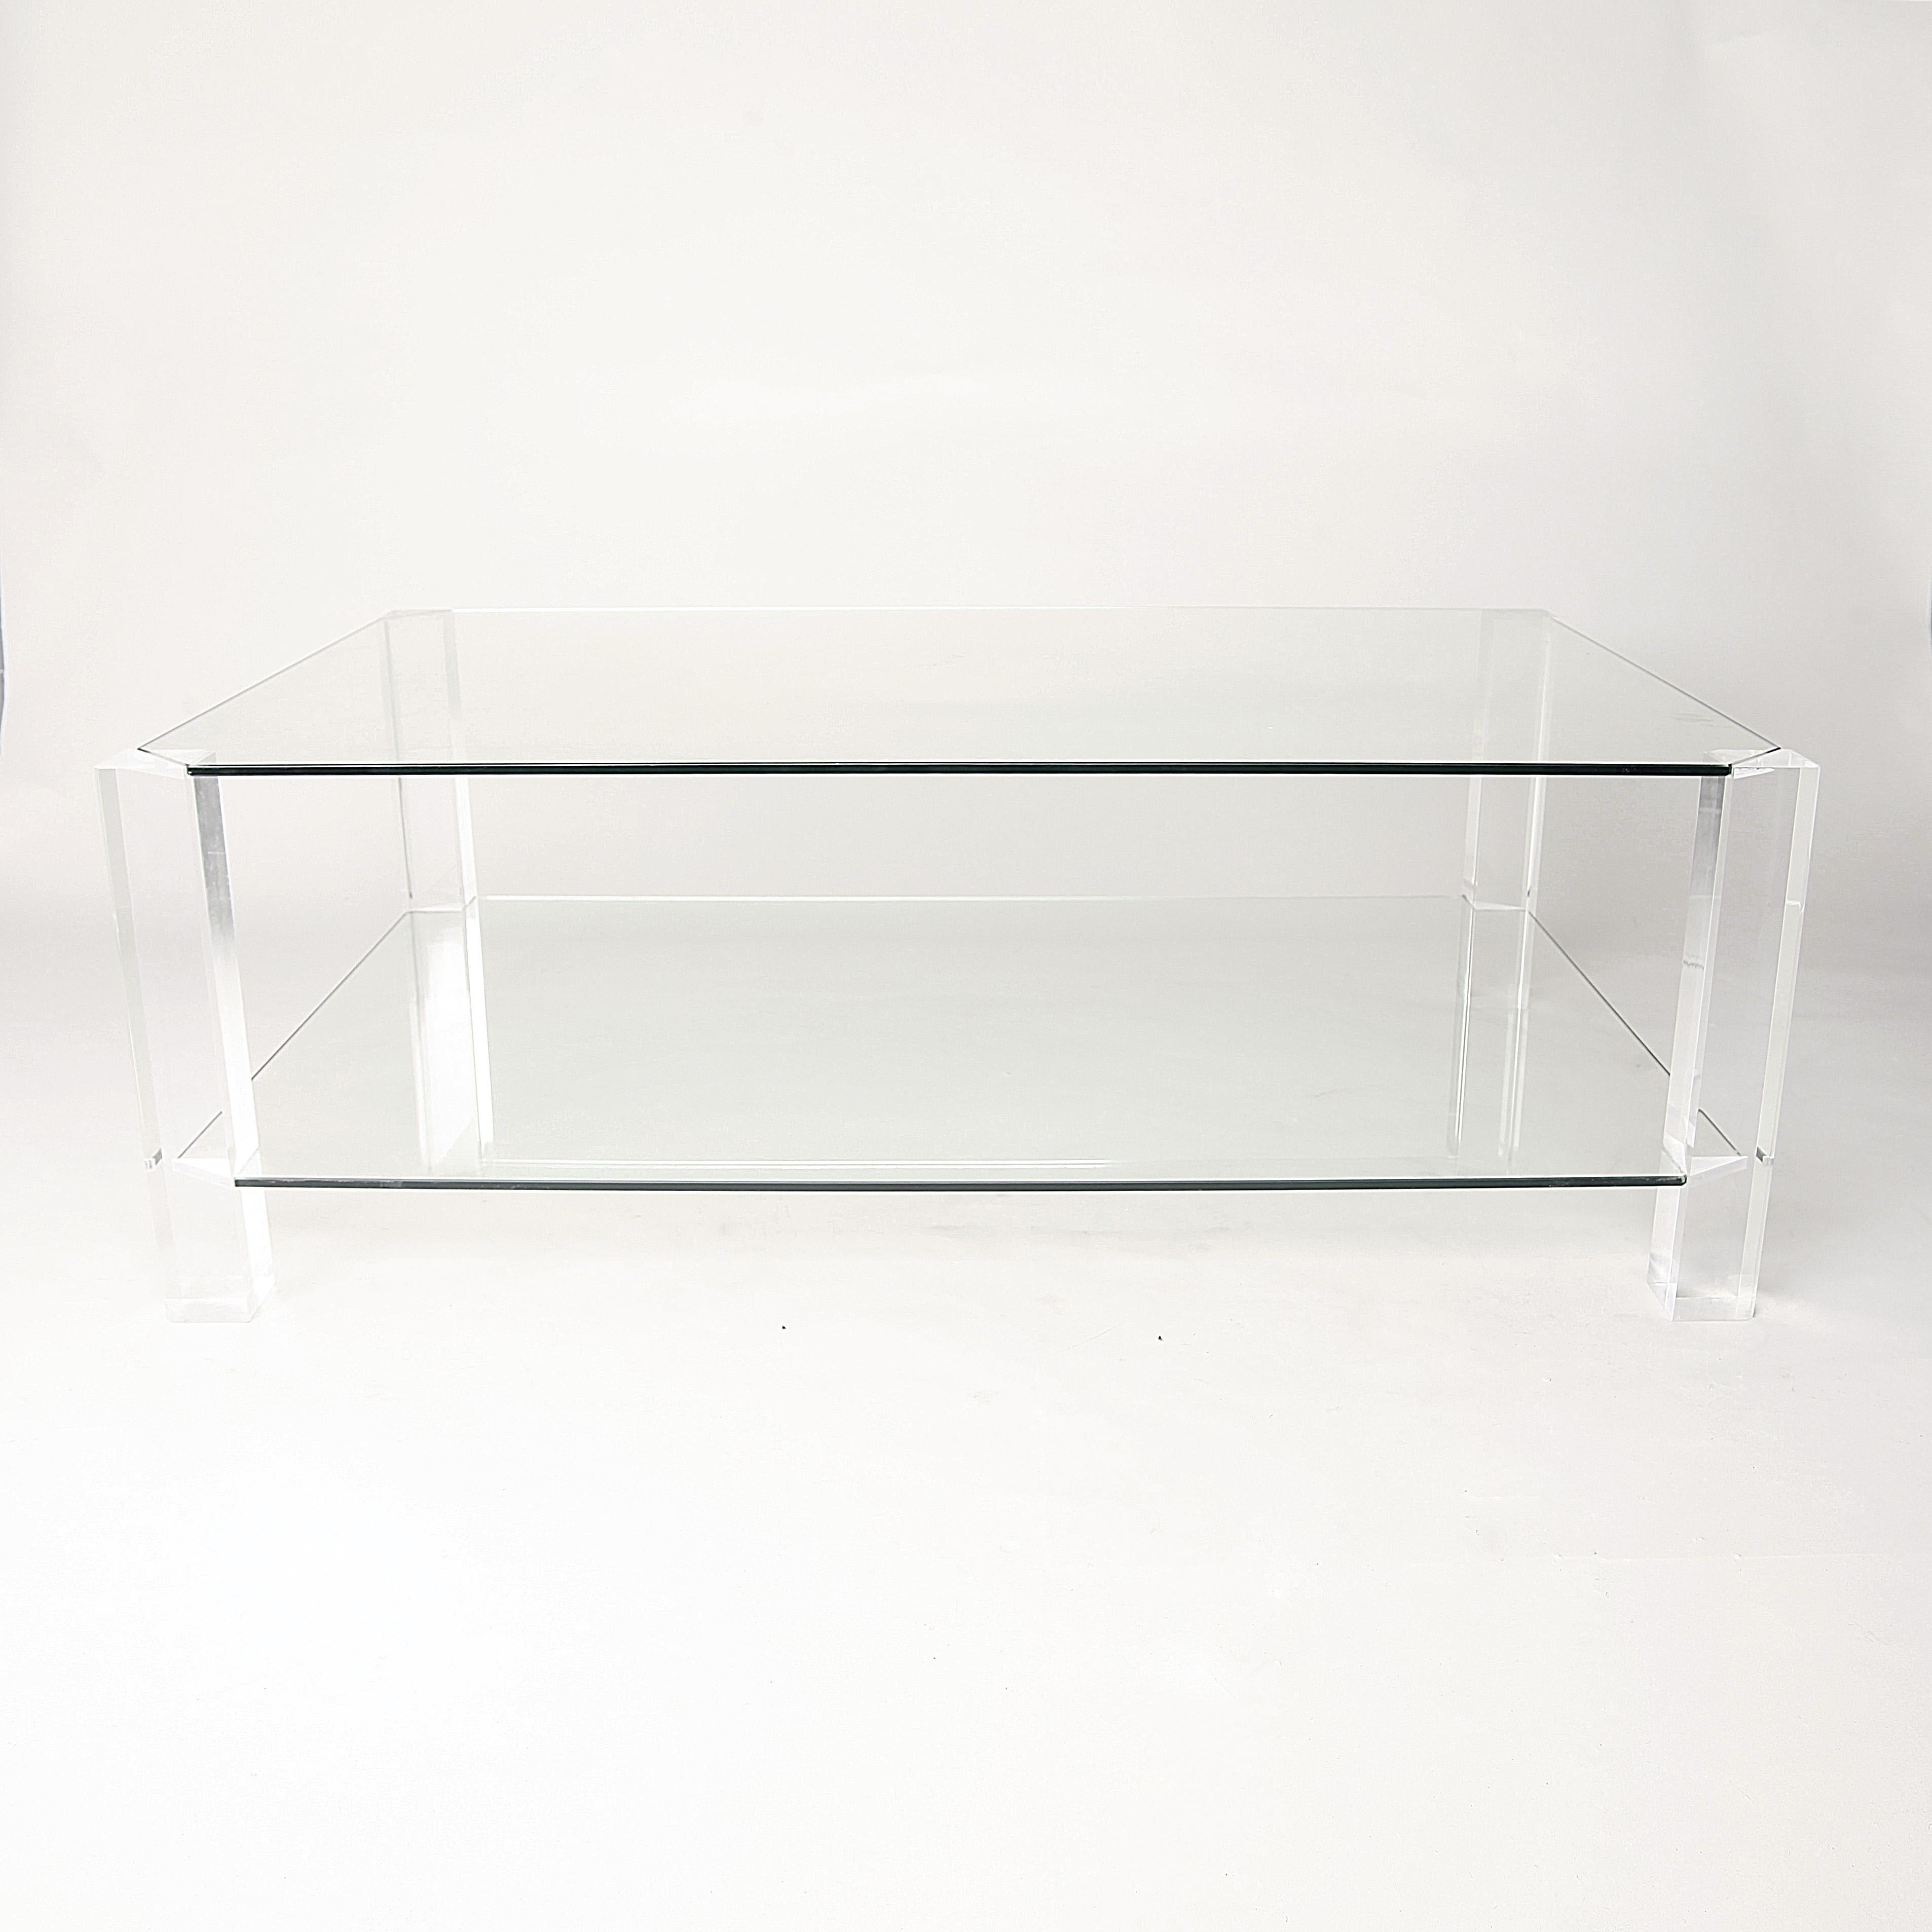 An almost invisible rectangular two-tier glass and Lucite coffee table, designed by Andrew and Sarah Hills for Porta Romana. Square Lucite legs with glass top and tier. An amazingly minimal and modern coffee table. The table authenticated by Porta